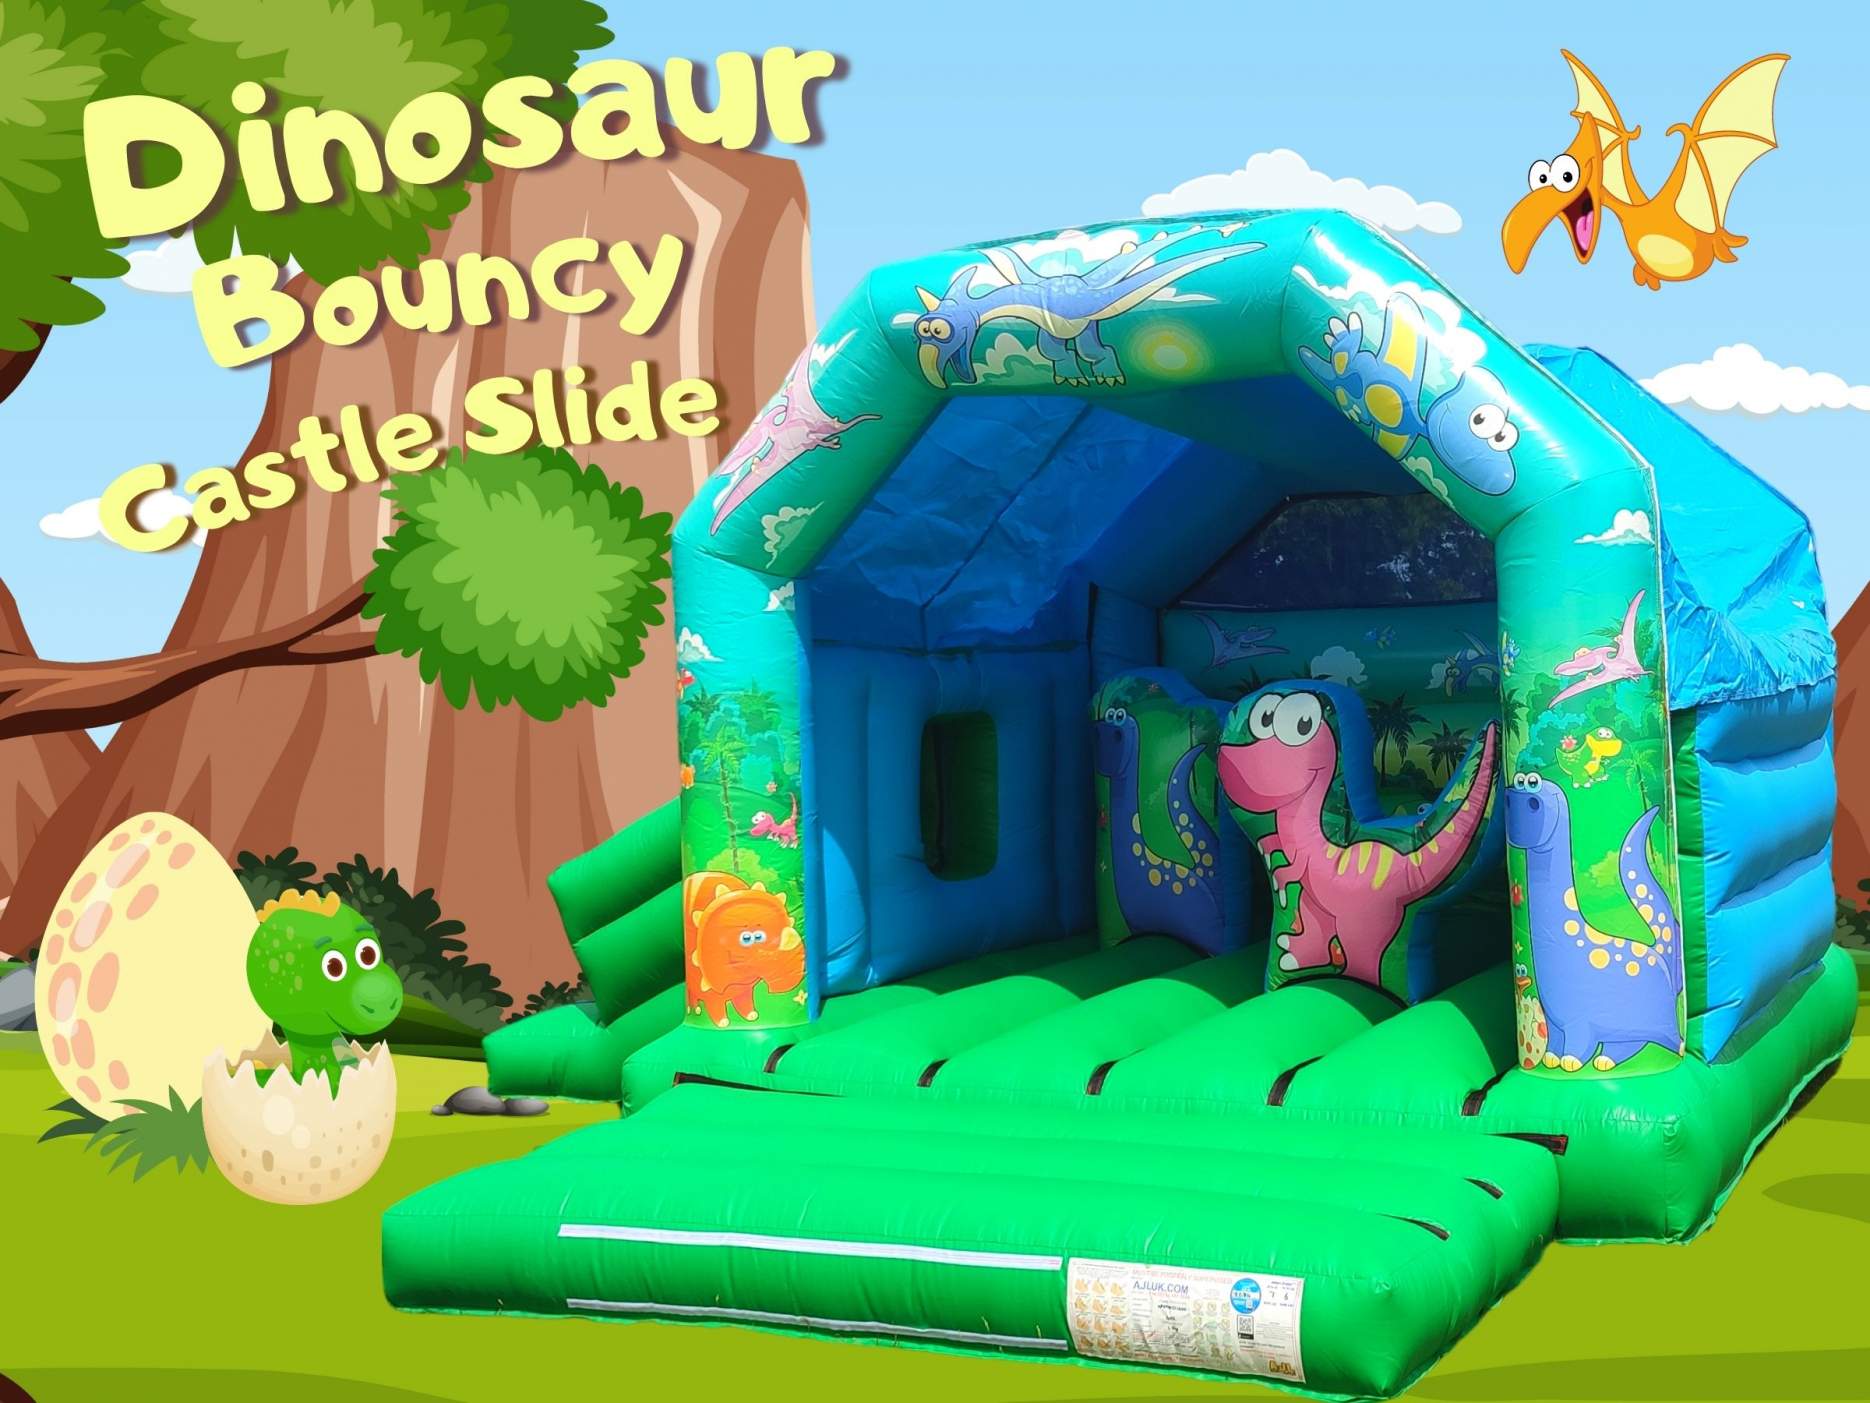 Dinosaur Bouncy Castle with Slide and 3D Pop ups